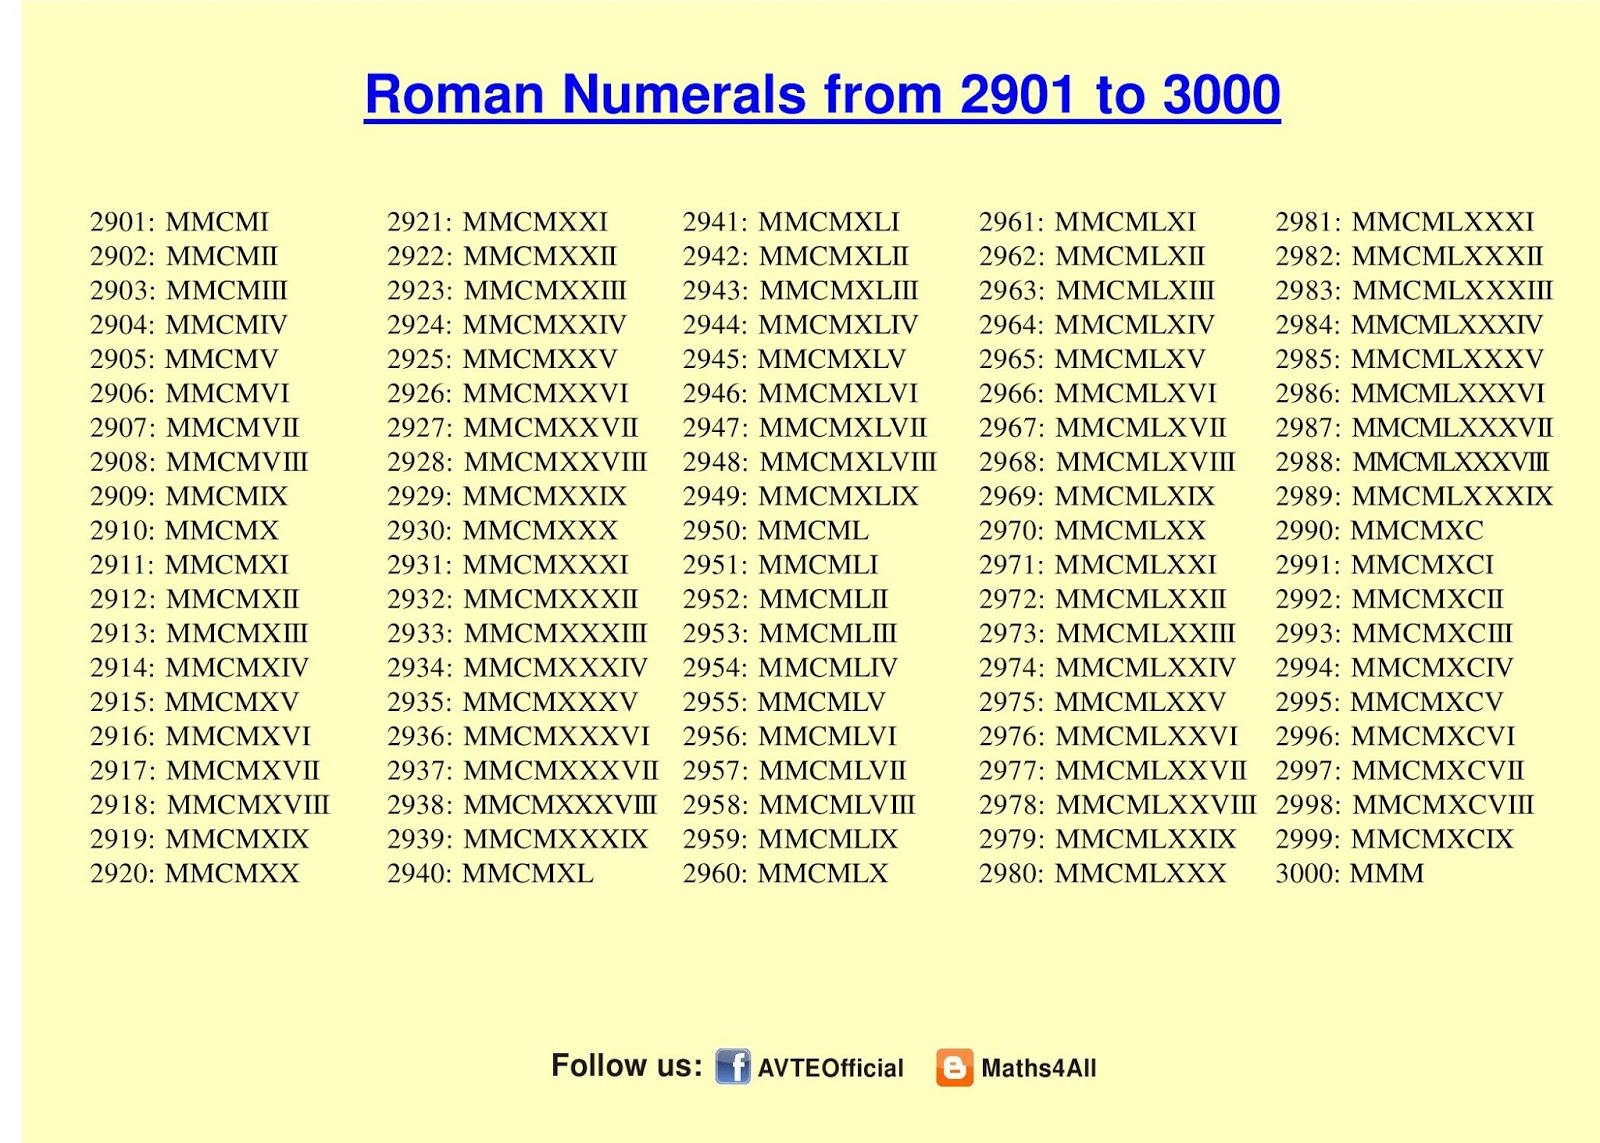 Maths4all ROMAN NUMERALS 2901 TO 3000